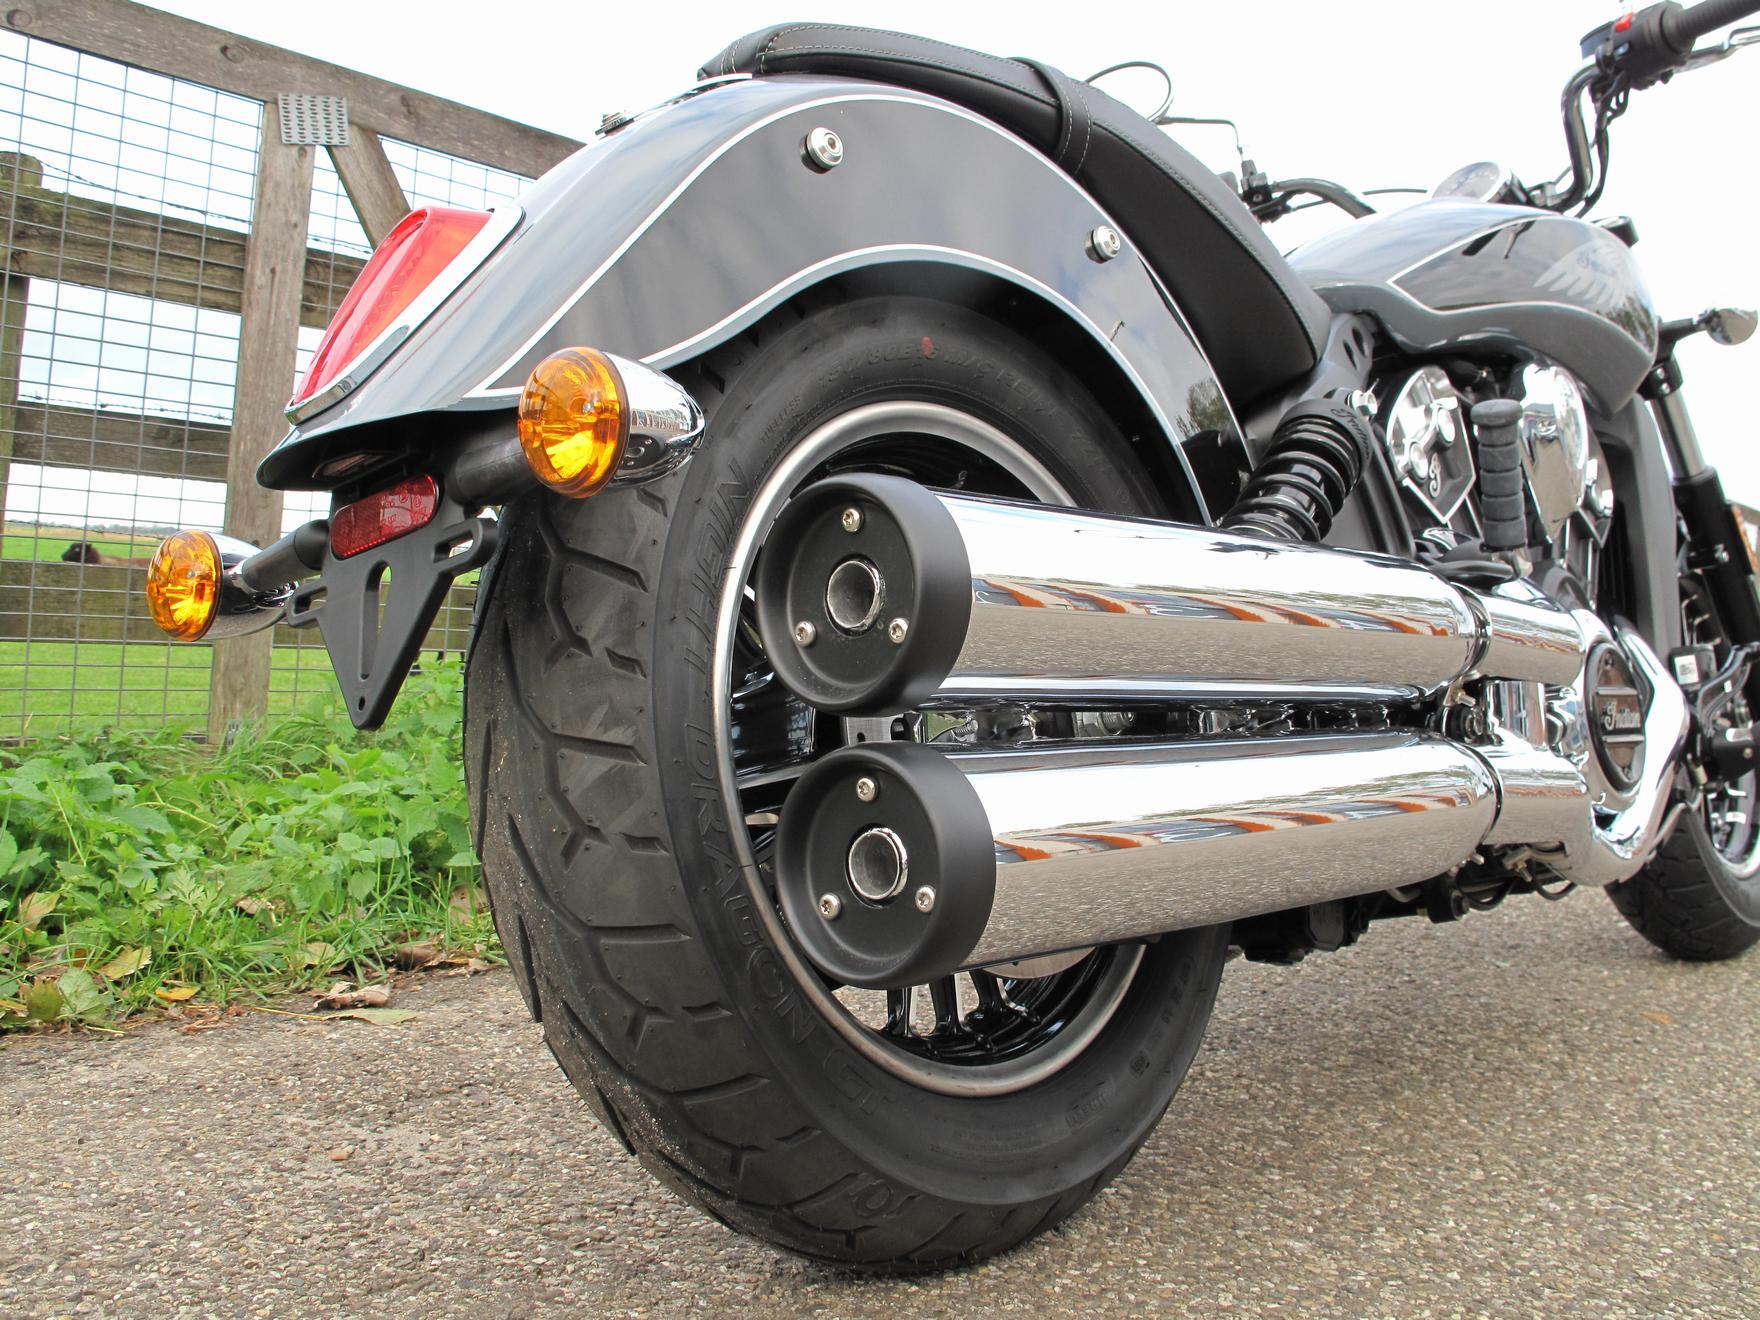 INDIAN - Scout 1200